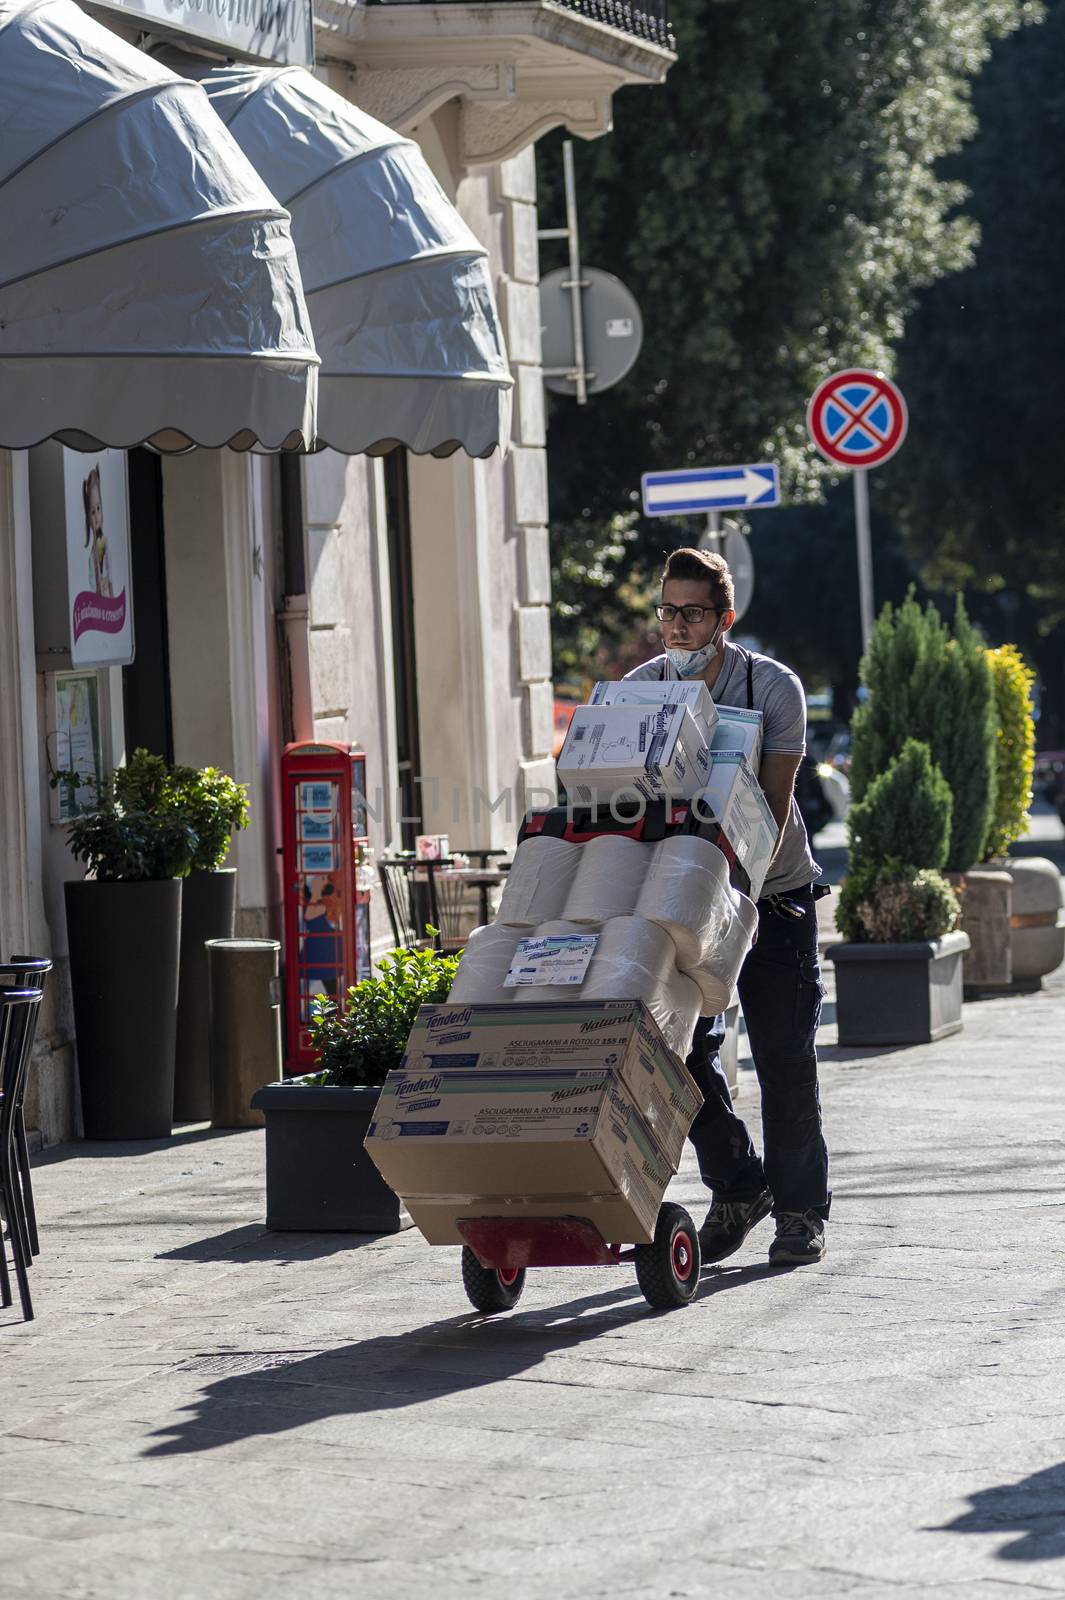 terni,italy october 21 2020:courier carrying packages in a shop